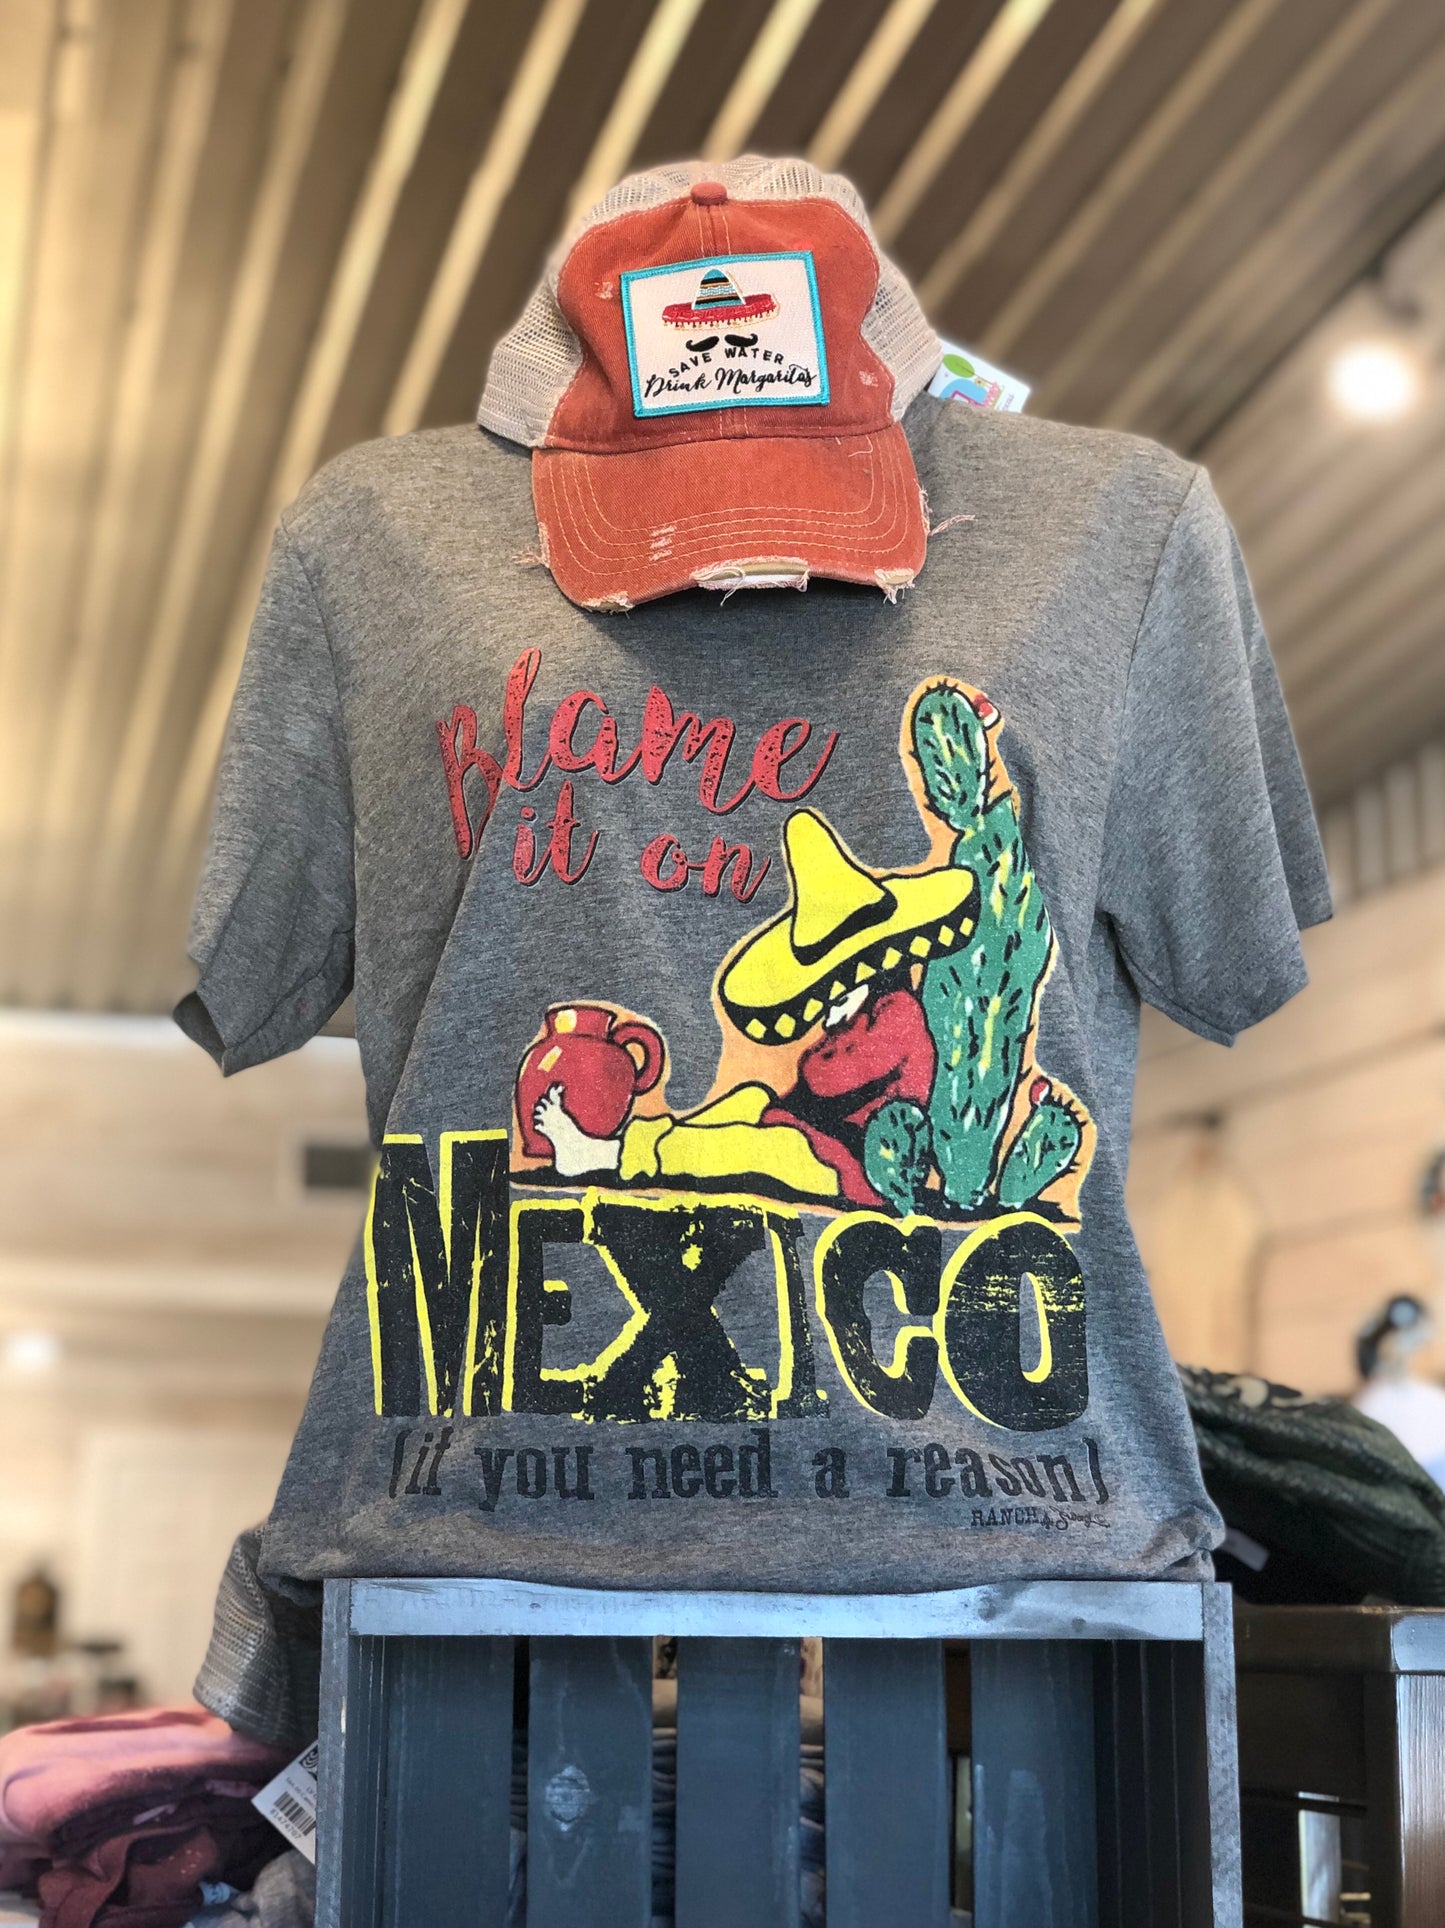 Blame it on Mexico tee